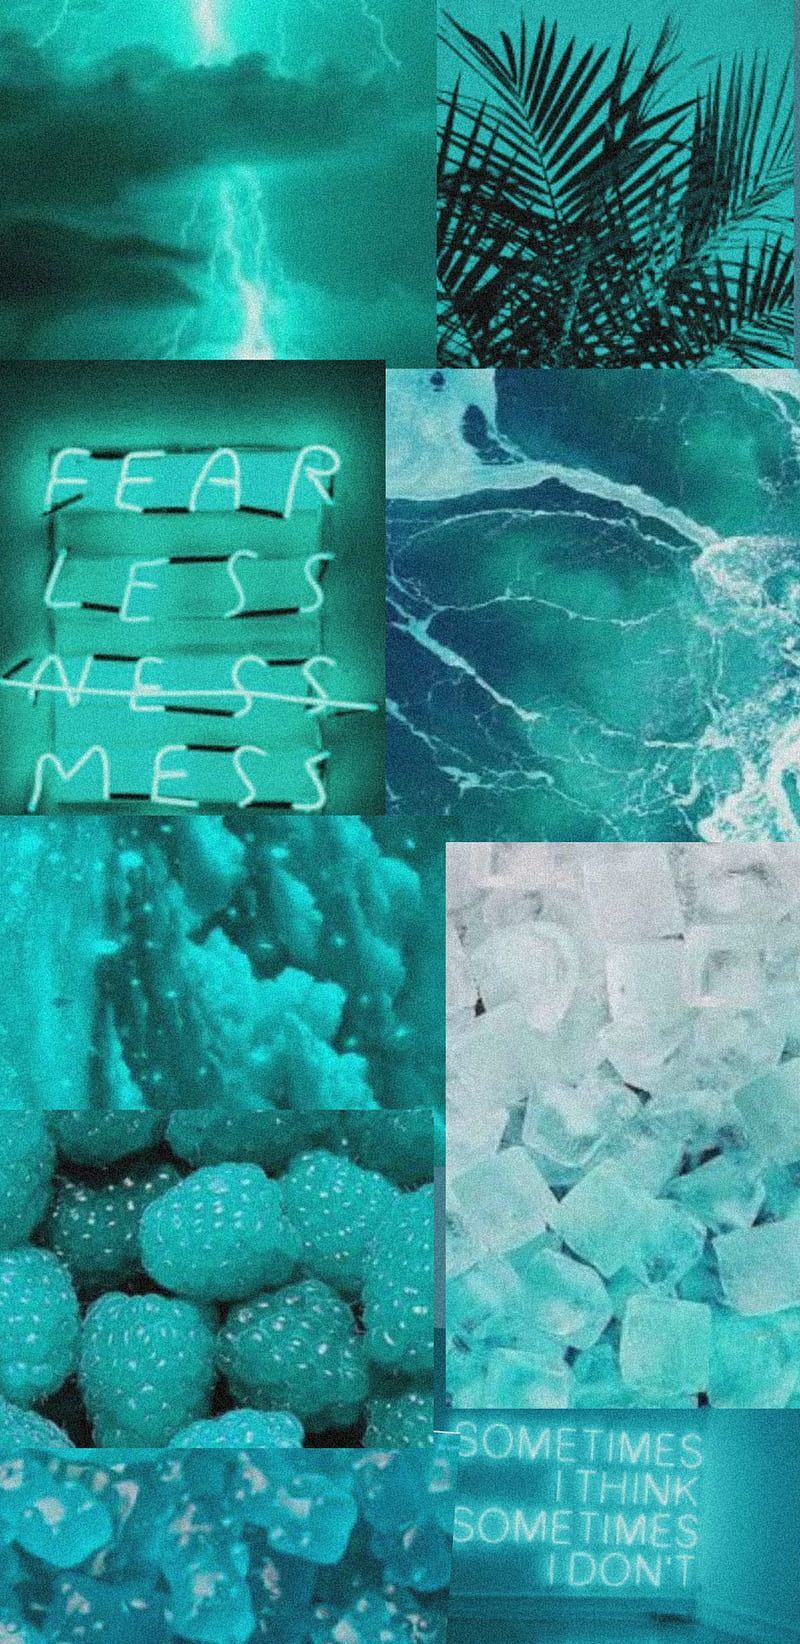 A collage of different aqua colored images - Cyan, teal, aqua, candy